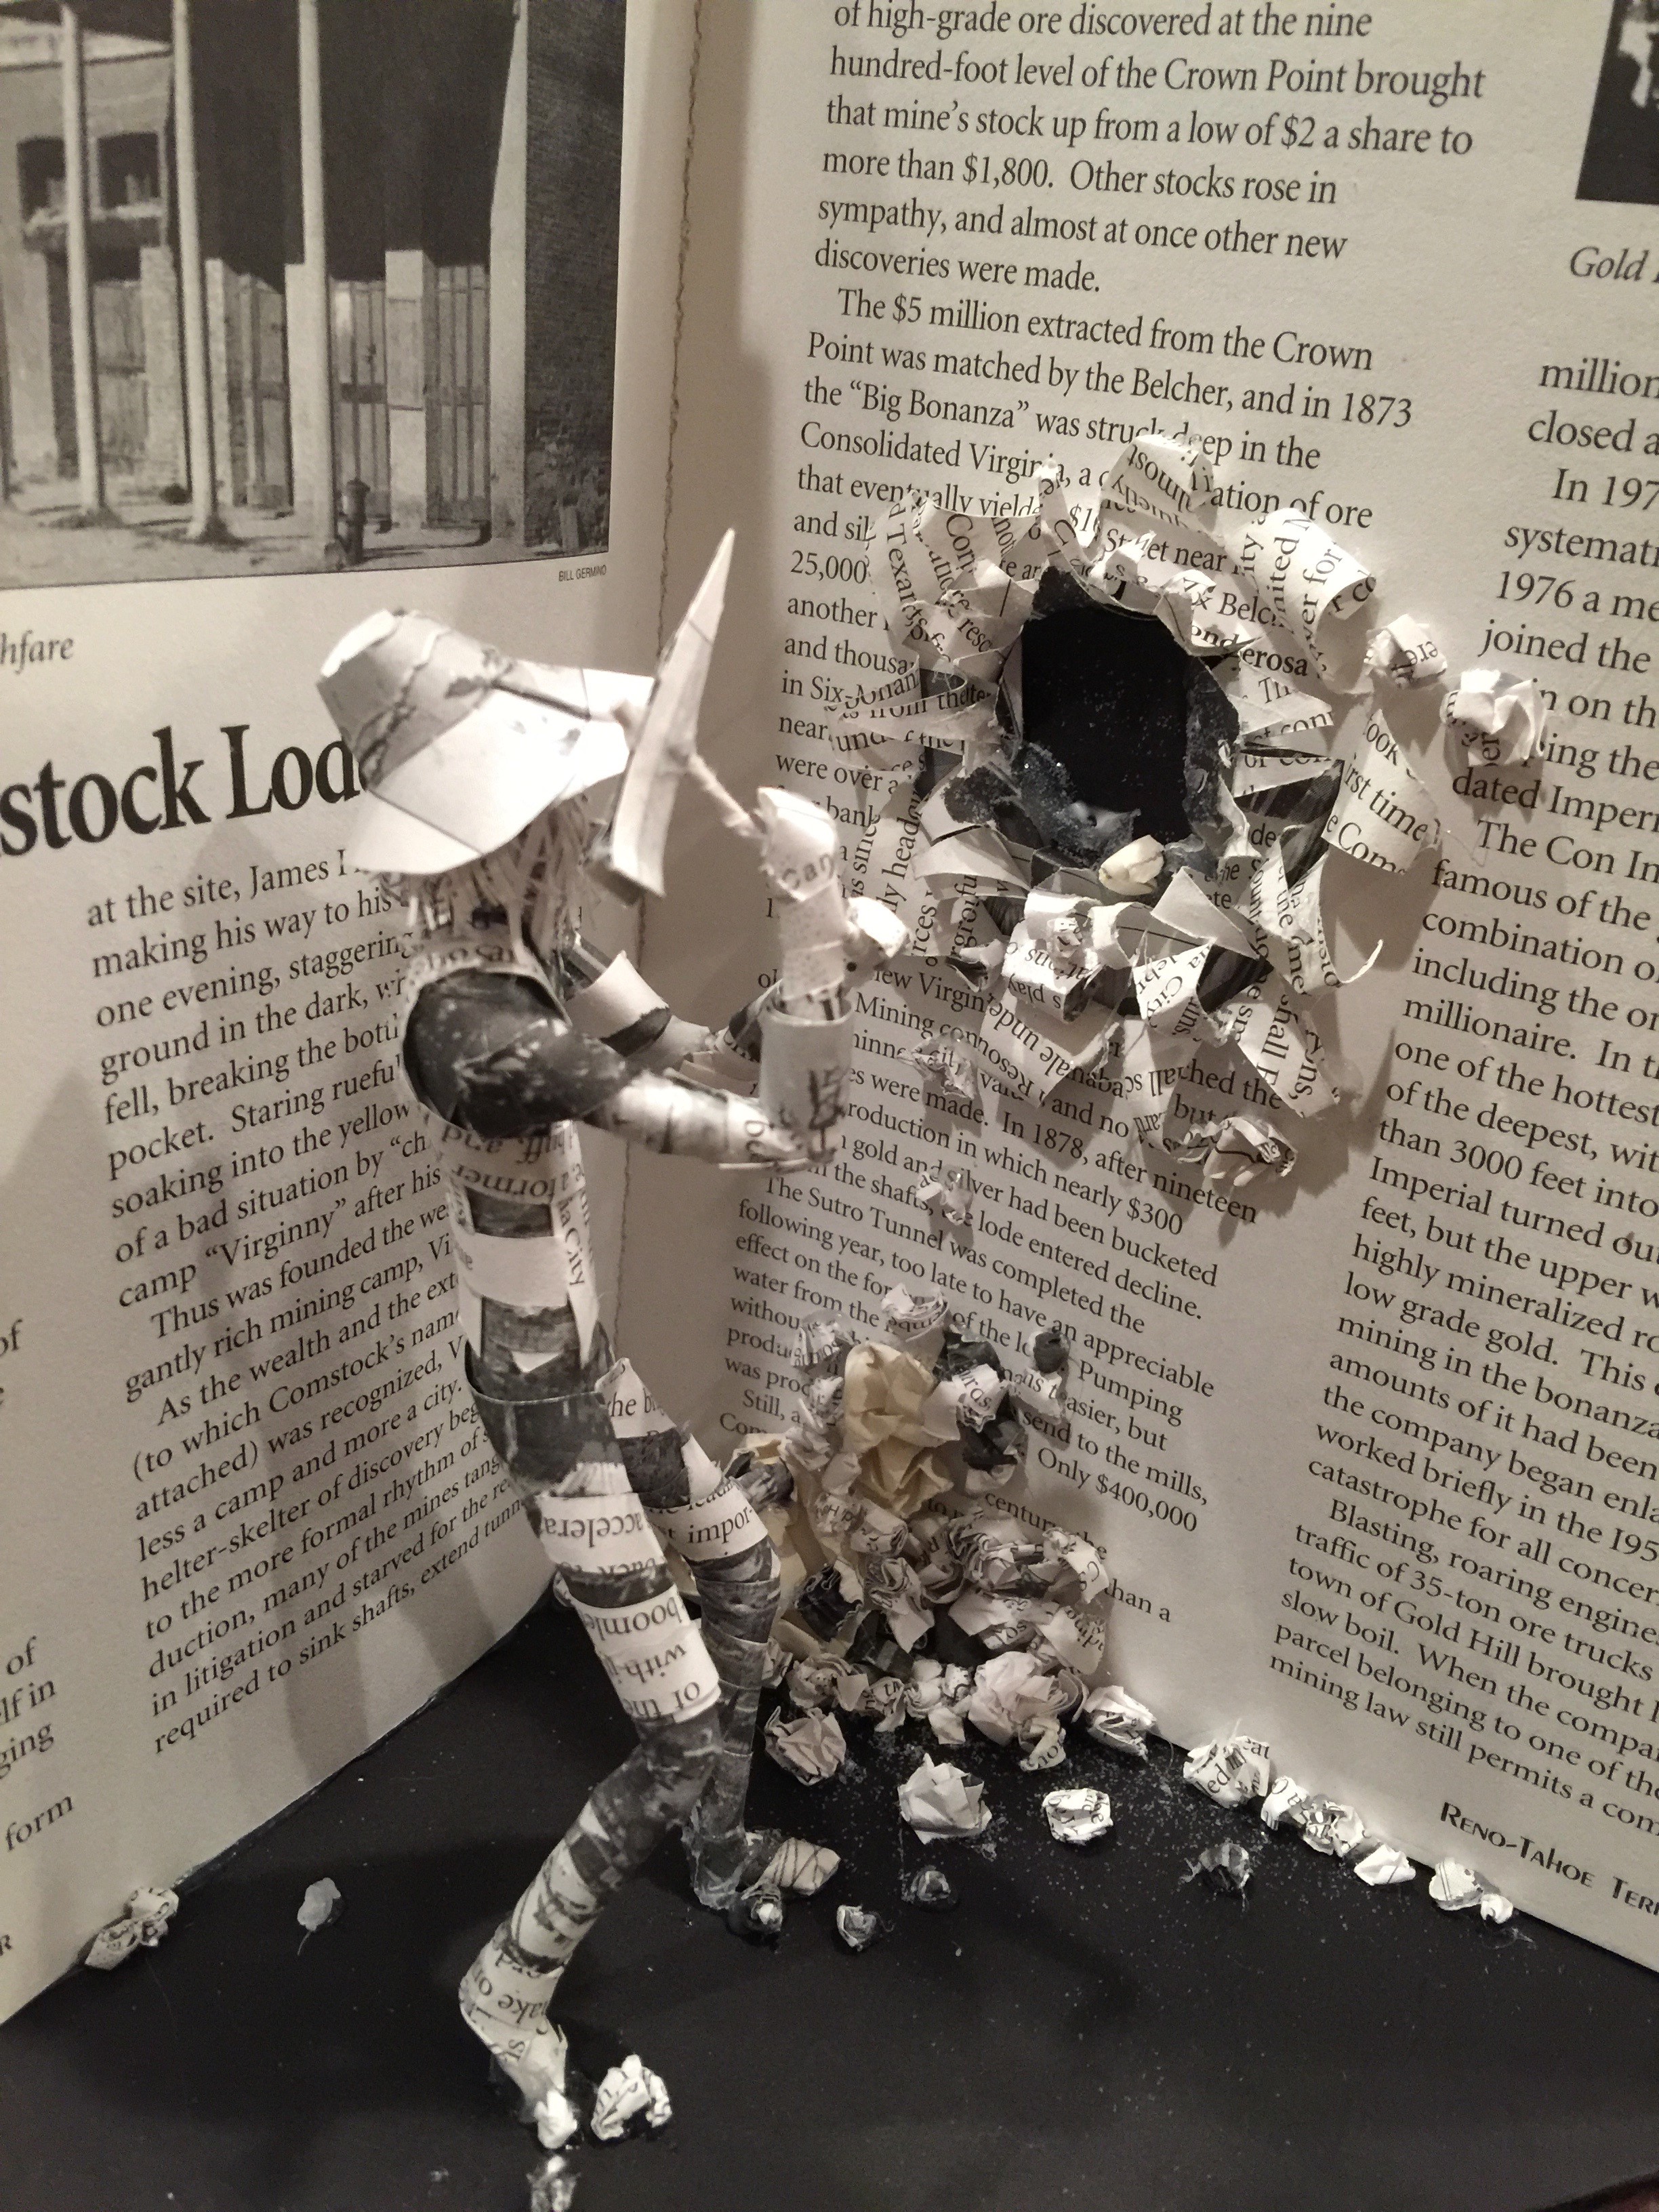 A paper sculpture of a miner digging into the depths of a book